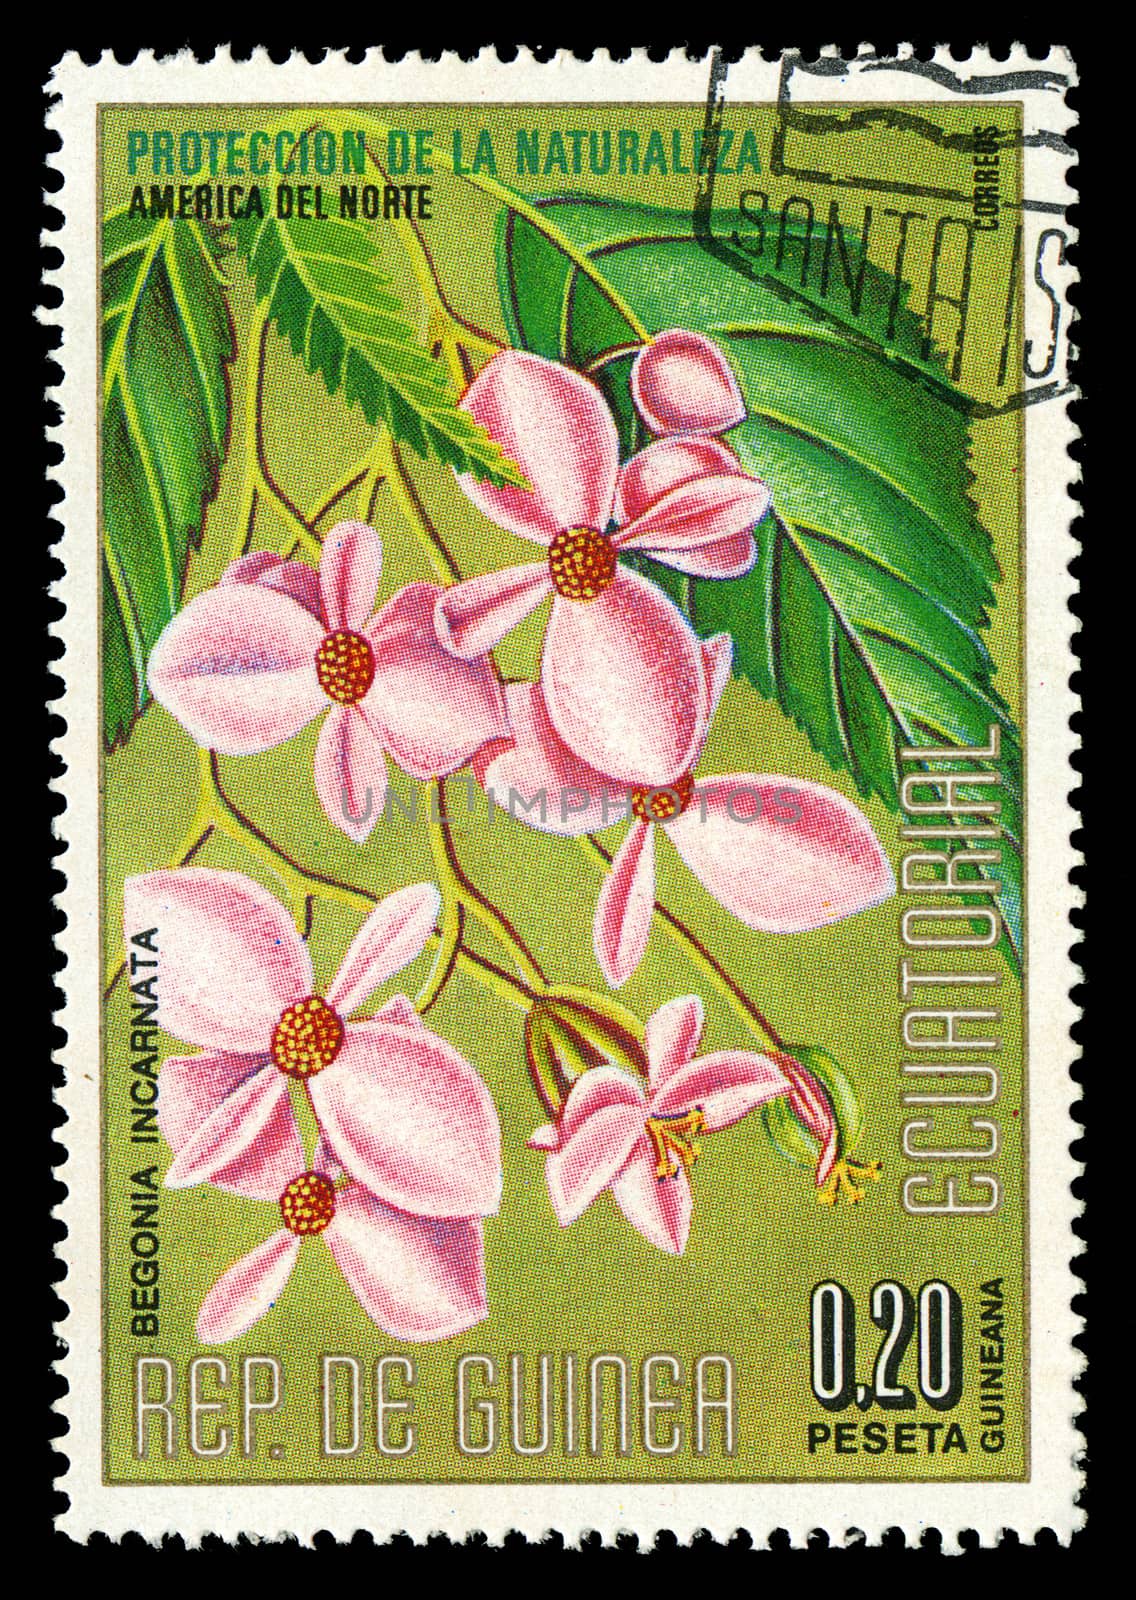 EQUATORIAL GUINEA - CIRCA 1974: A stamp printed in Equatorial Guinea shows Begonia Incarnata, series is devoted to flowers, circa 1974 by Zhukow